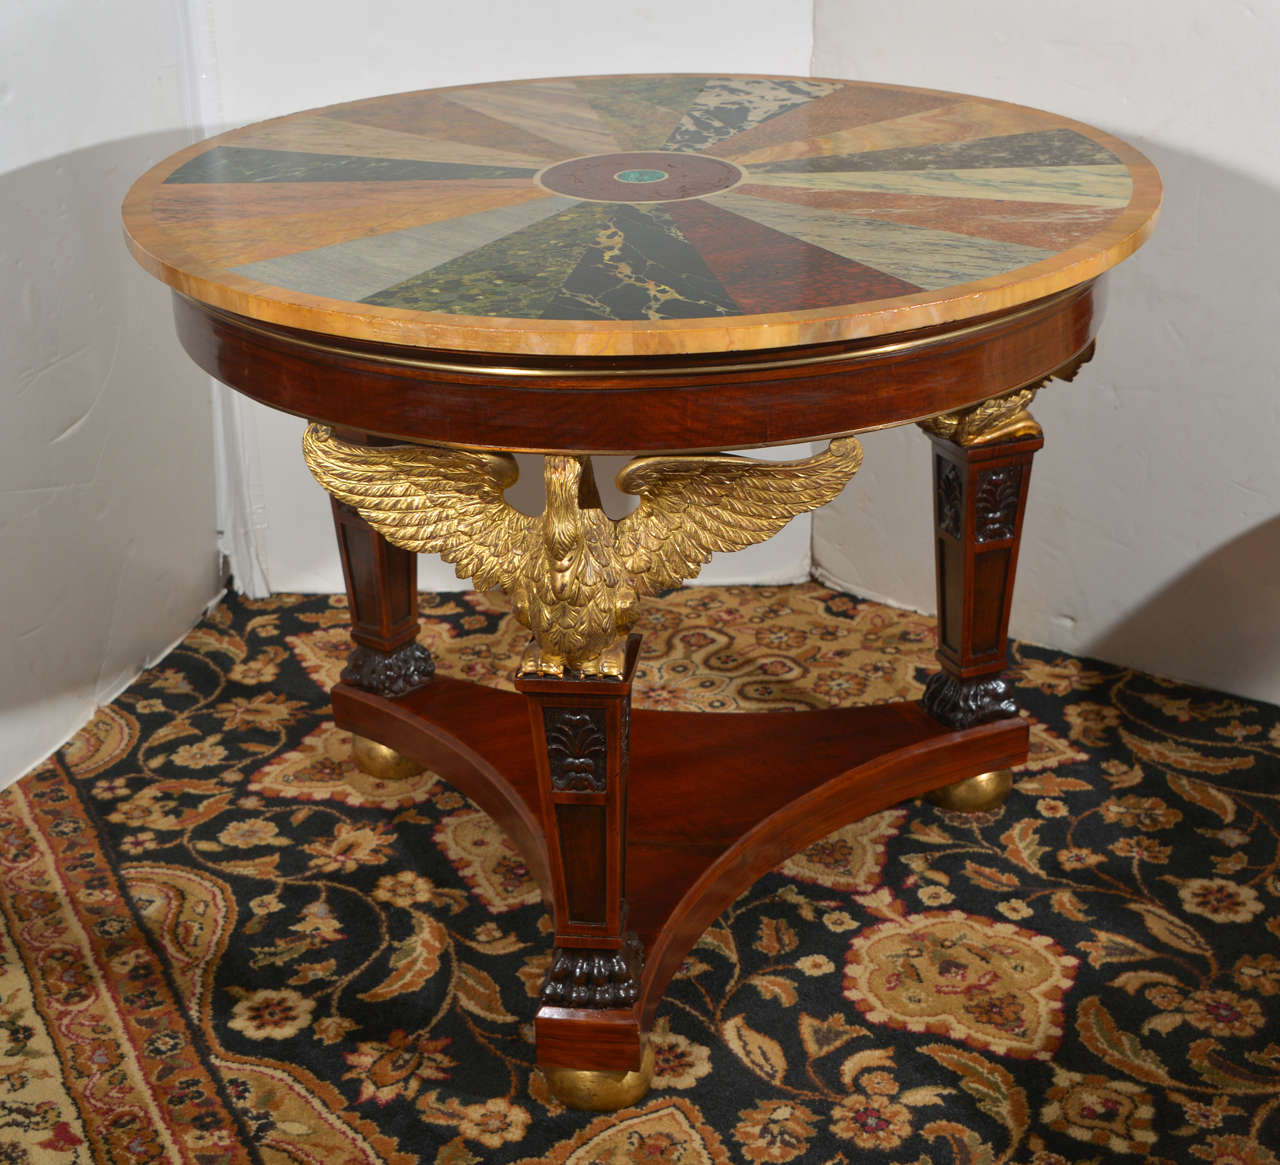 19th c Empire mahogany center table with a marble specimen top and gilded Eagles